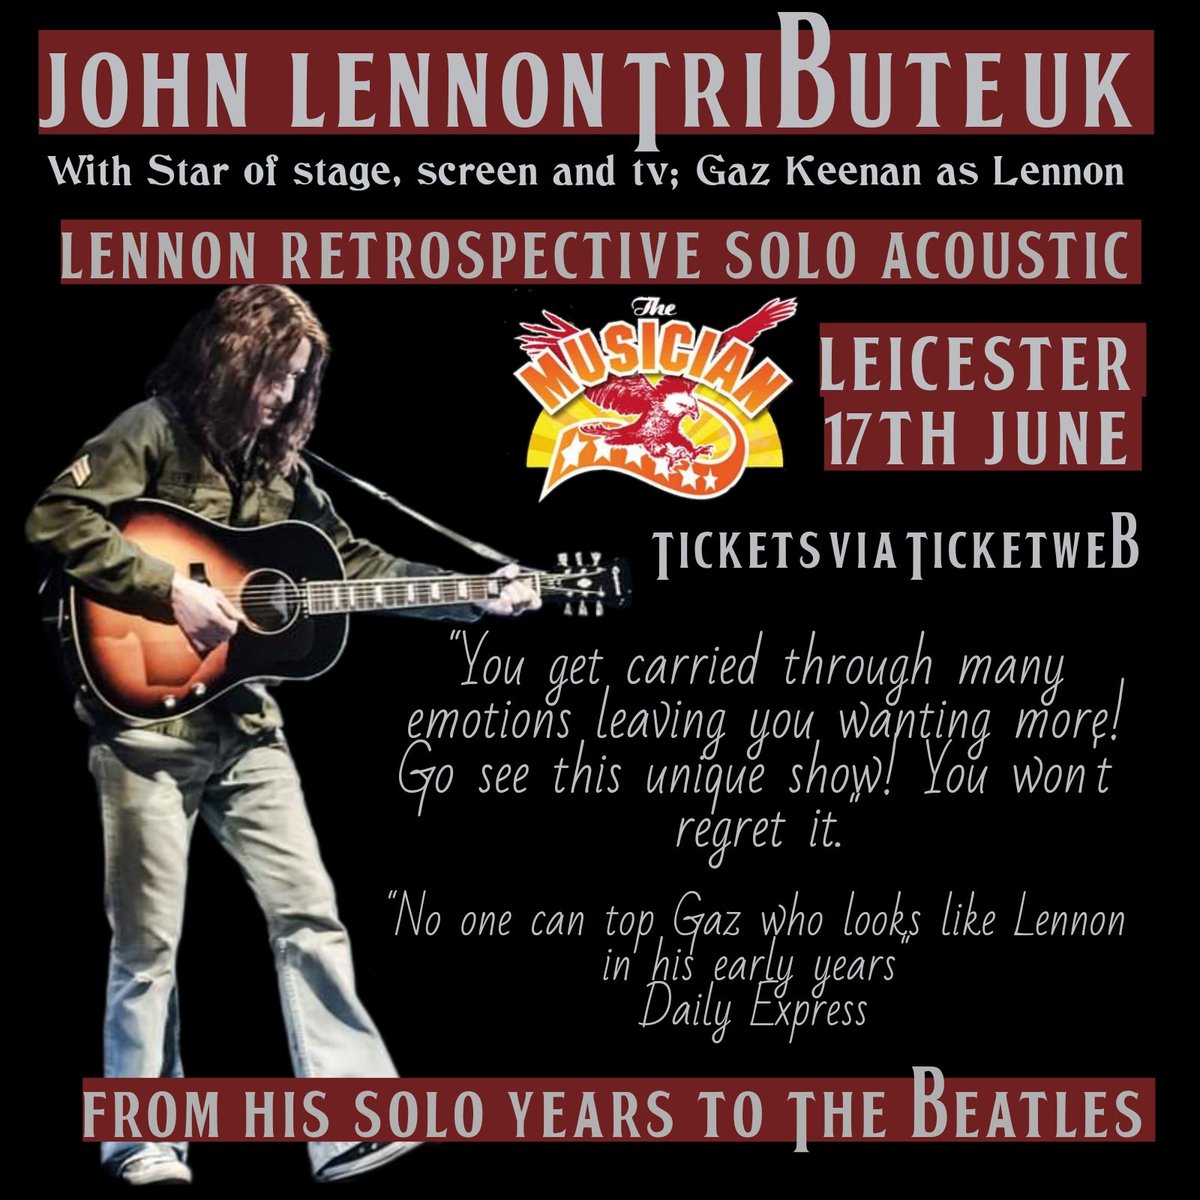 @johnlennonuk1 @wakeuppromotion @The_Sound_House @MusicianVenue @gr8musicvenues @ARTSIN @coolasleicester @whatsoninleics @DiscoverLeices @VisitLeicester @lovelboro @BBCLeicester @hermitagefm @BeatlesEarth @Highcross @FabCovers @BeatlesKingdom @DemonFM @phoebe_d1 @leicesterfest @Leicester_News @BeatlemaniaUK Beatles fan? Lennon fan? Live in East Midlands? 
Be at @MusicianVenue Leicester on 17th as UK'S no.1 Lennon Tribute,  Gaz Keenan returns for an unforgettable night of jaw dropping solos & singalong classics.
Support from Daz Lynch music.
Tickets 👇  ticketweb.uk/event/john-len…